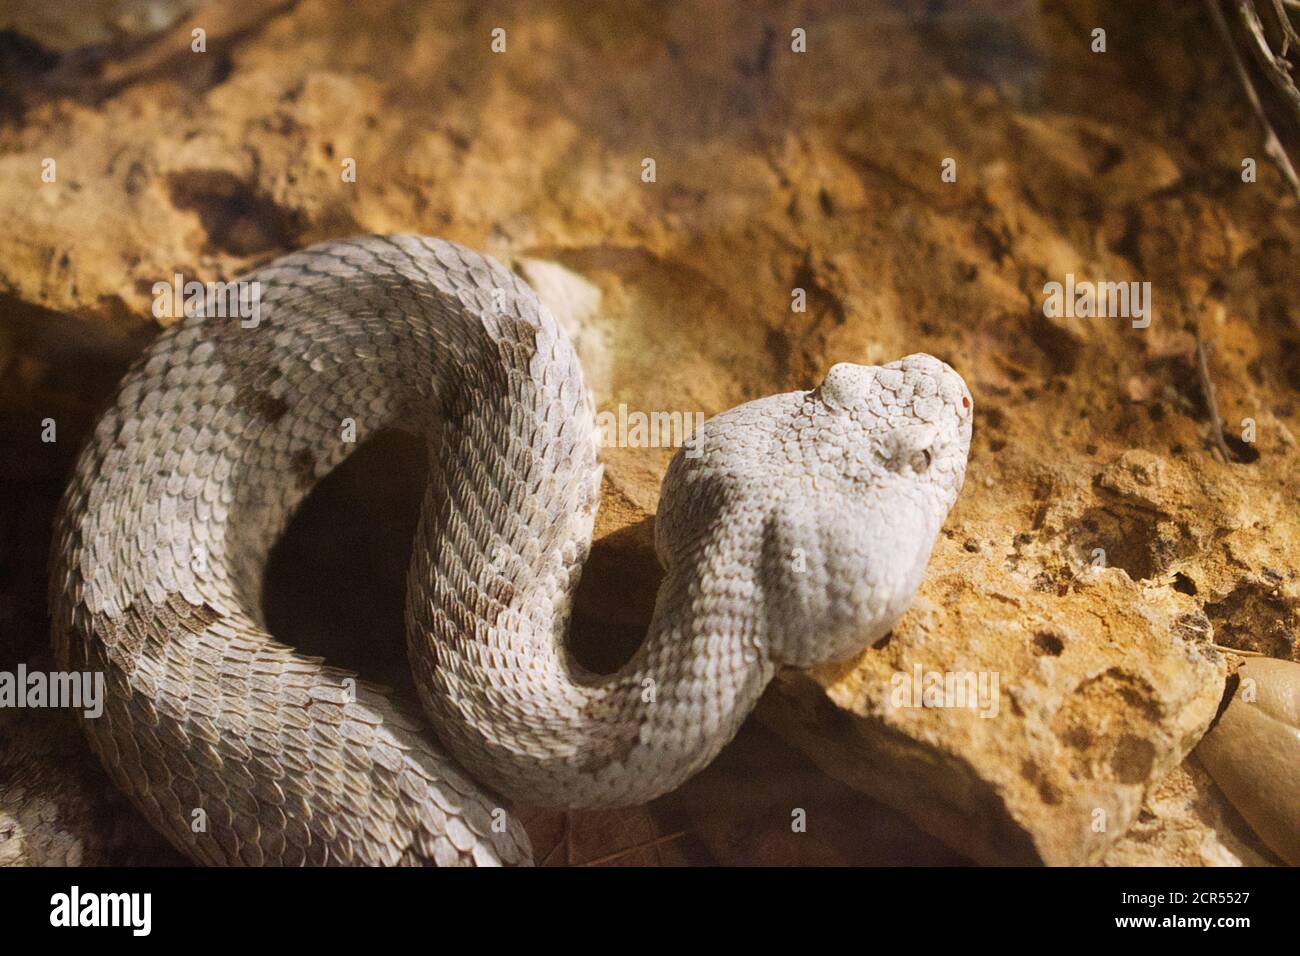 Close up on white and tan striped snake in a zoo enclosure Stock Photo